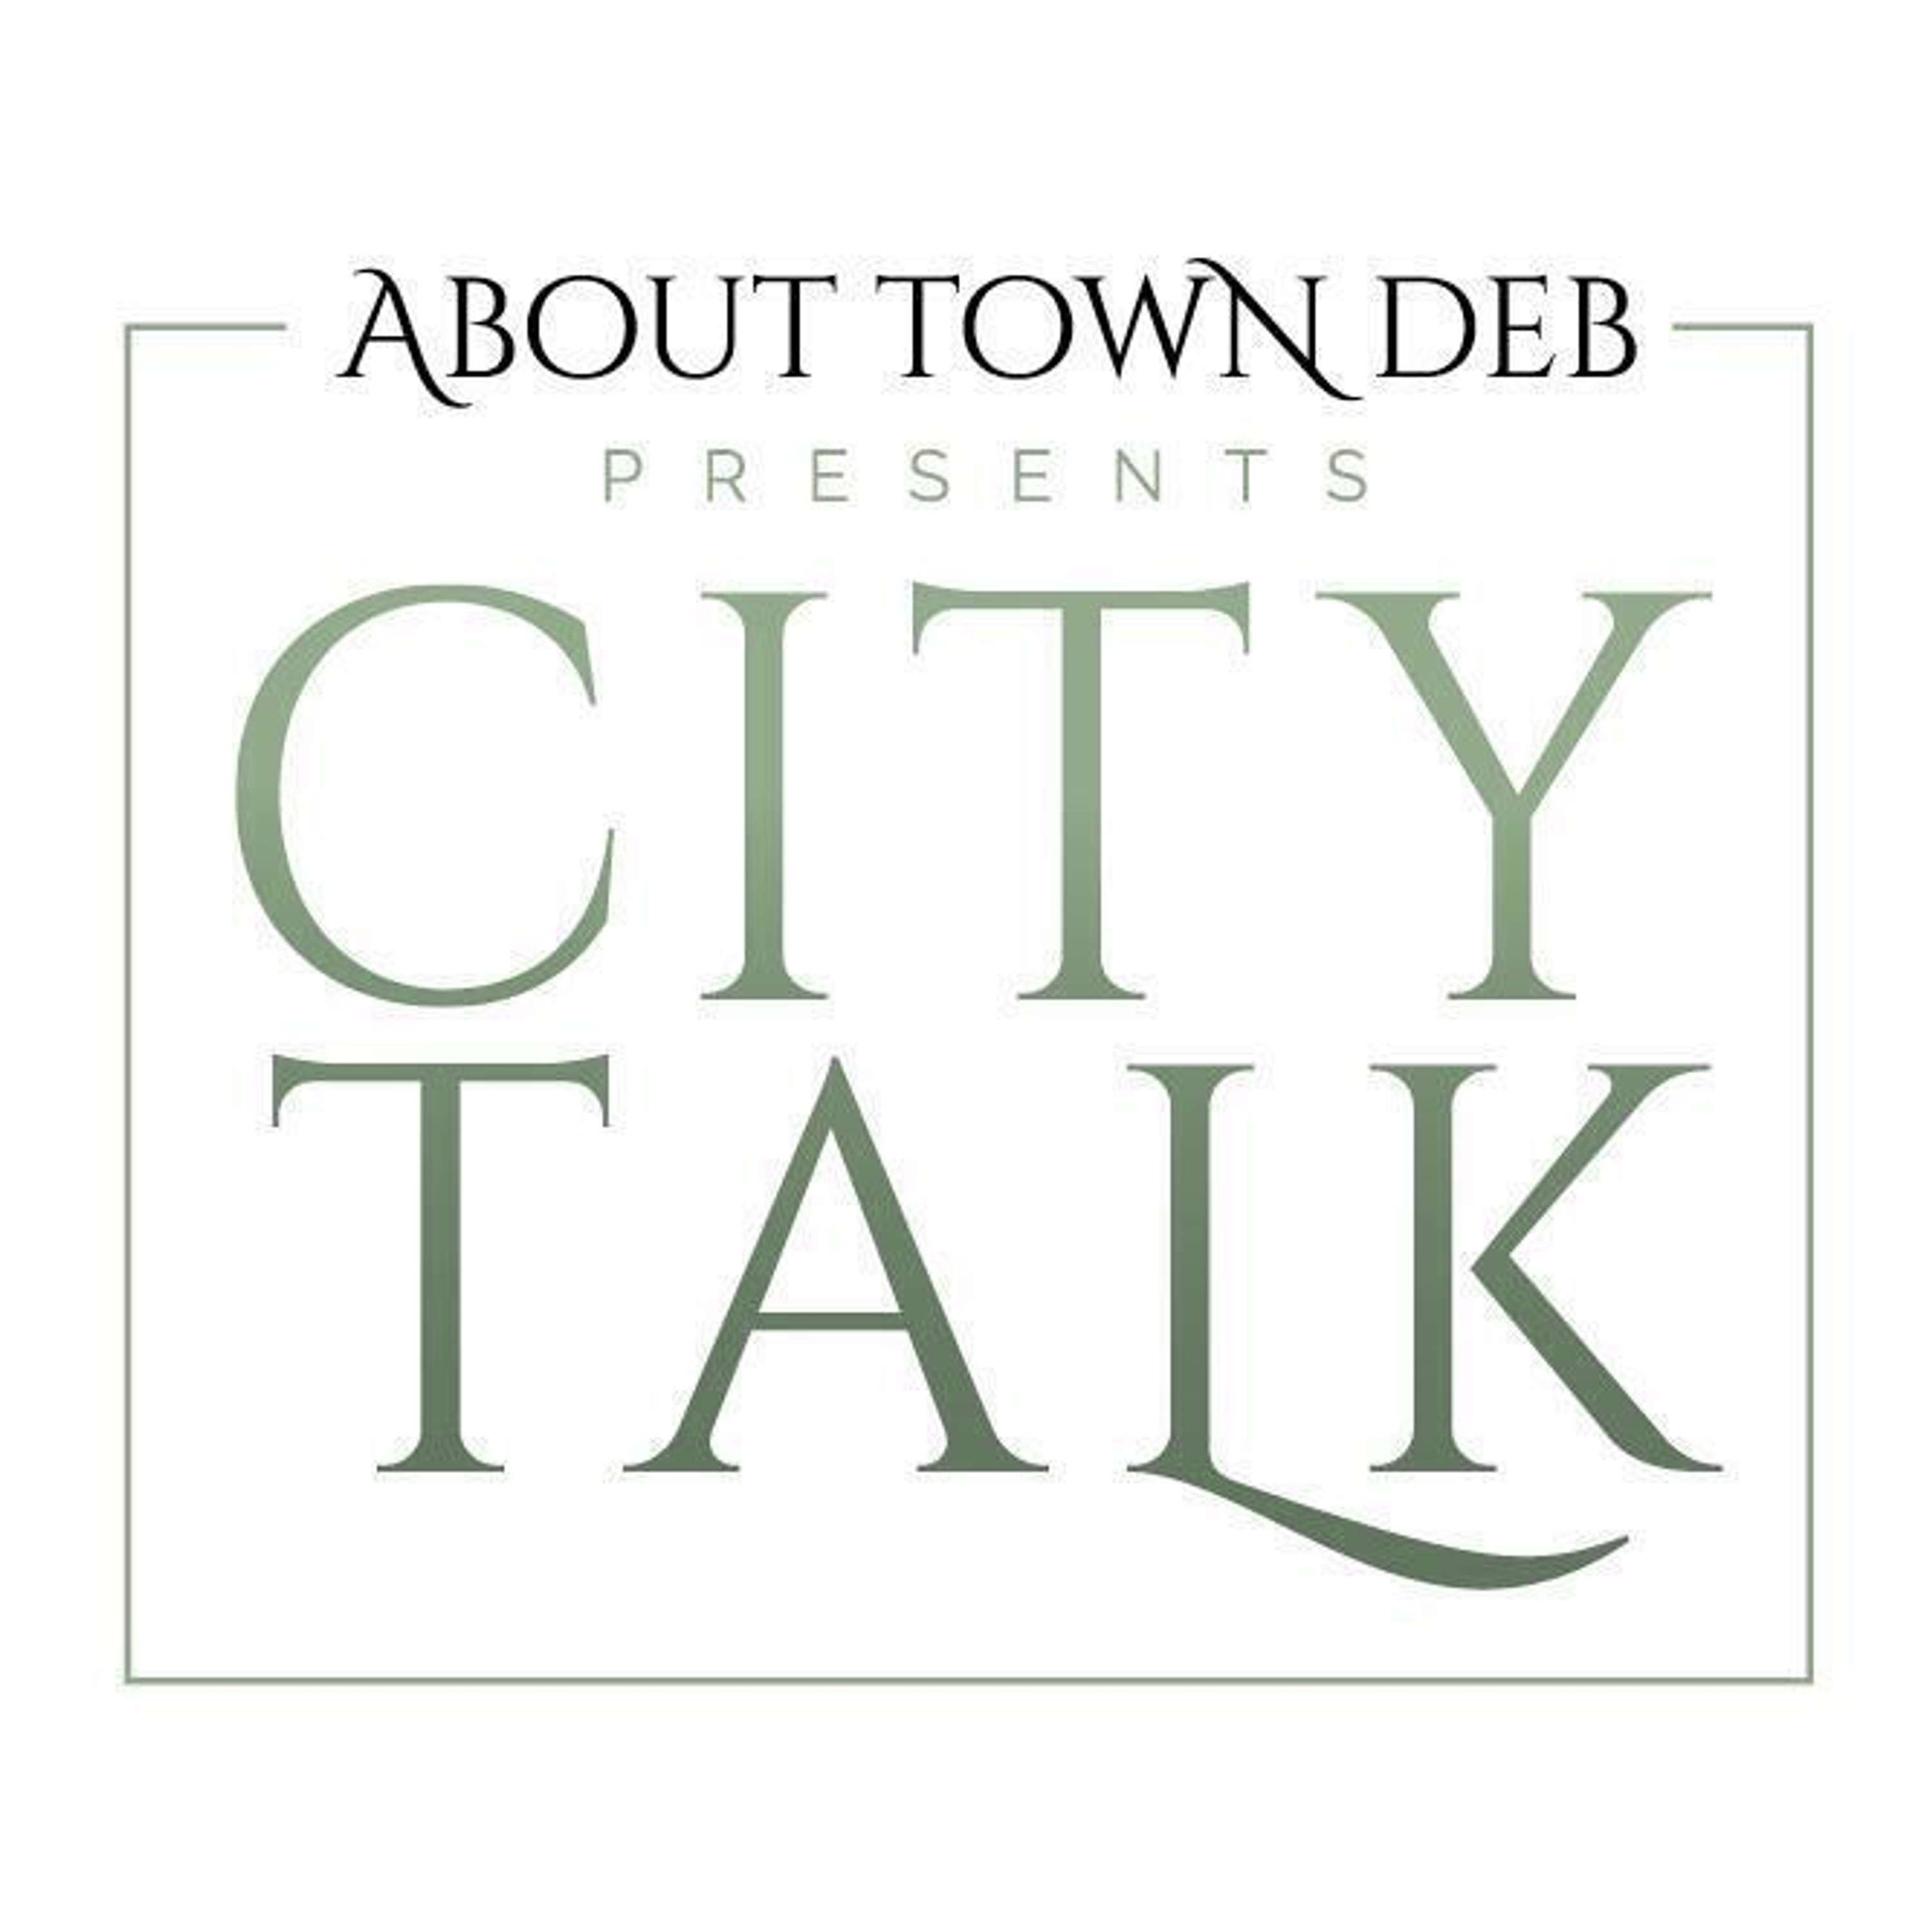 BEST OF - About Town Deb Presents City Talk: Dream BIG with Wanda & Brittany Gaines (03/29/23)